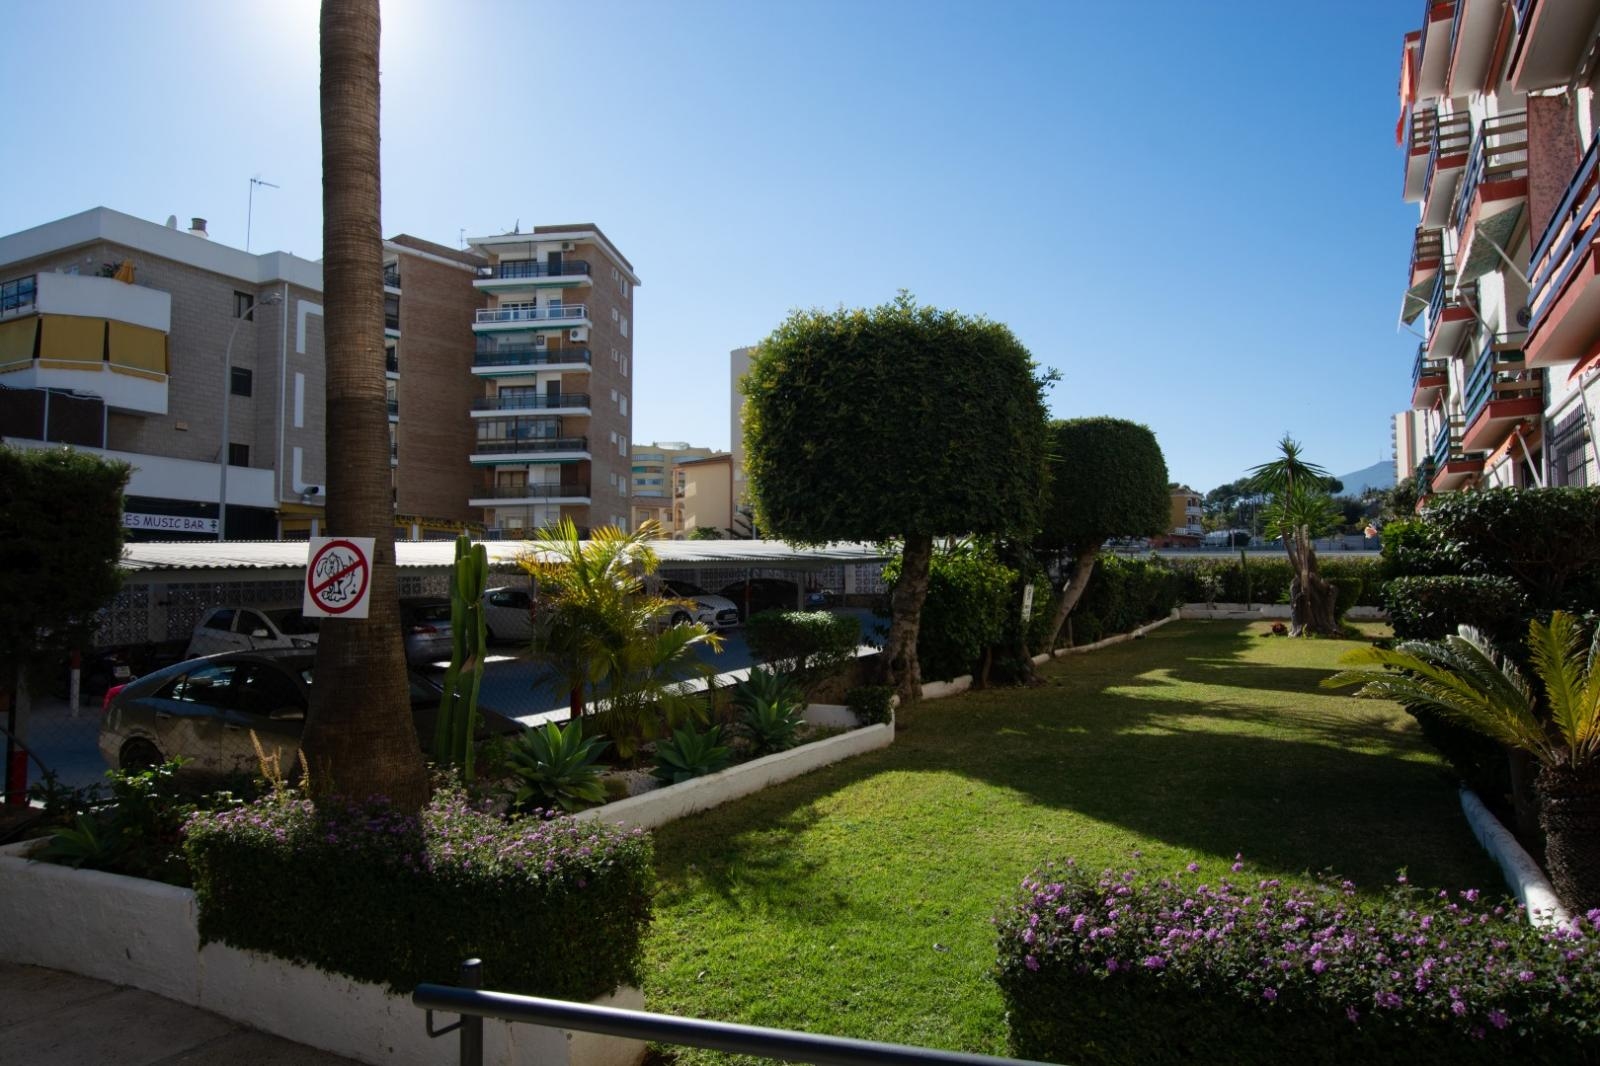 Apartment for holidays in Torremolinos